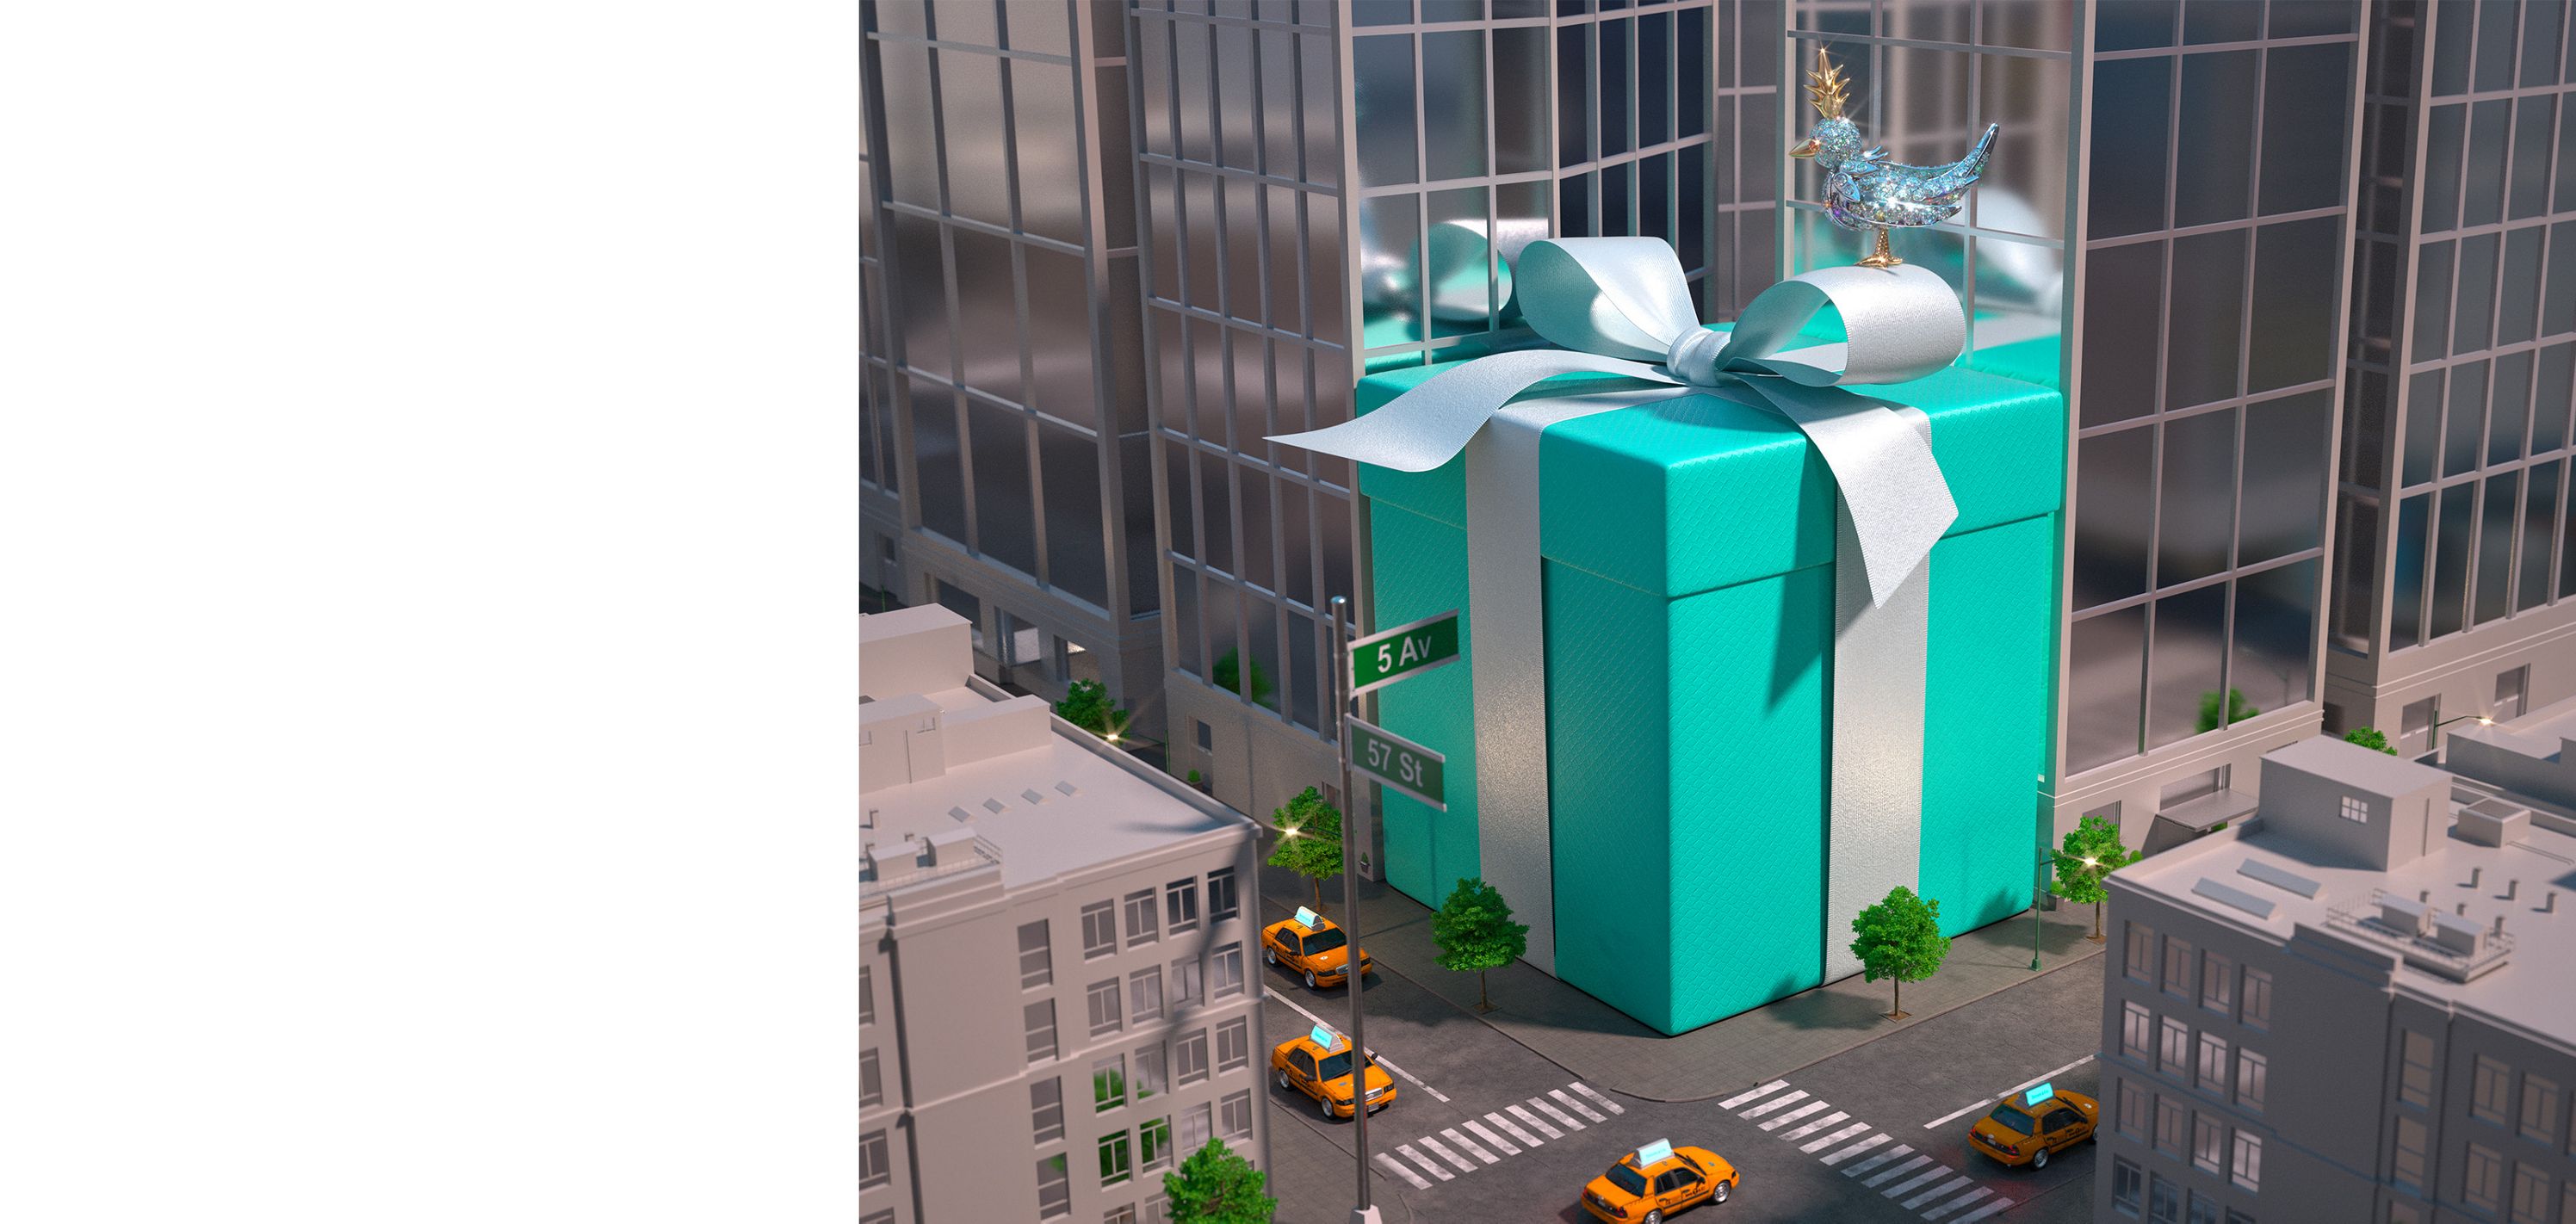 Tiffany & Co. Just Opened Their First Men's Pop-Up Shop in NYC